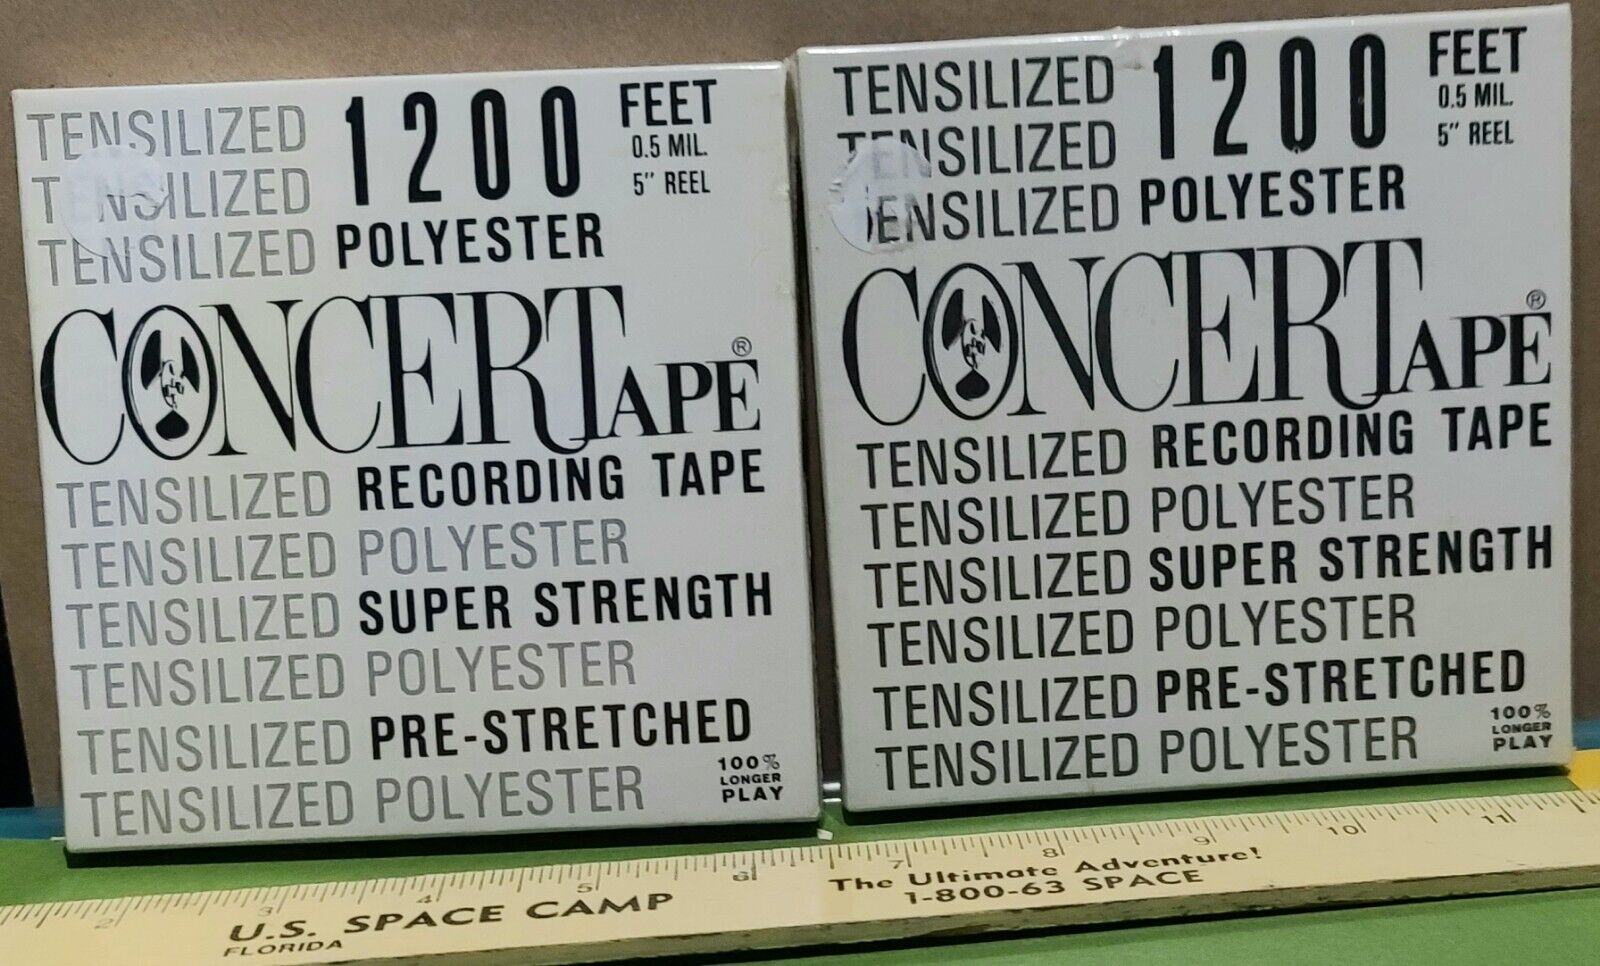 NEW Sealed Tensilized Polyester Concert Tape 1200 Feet 0.5 Mil 5\